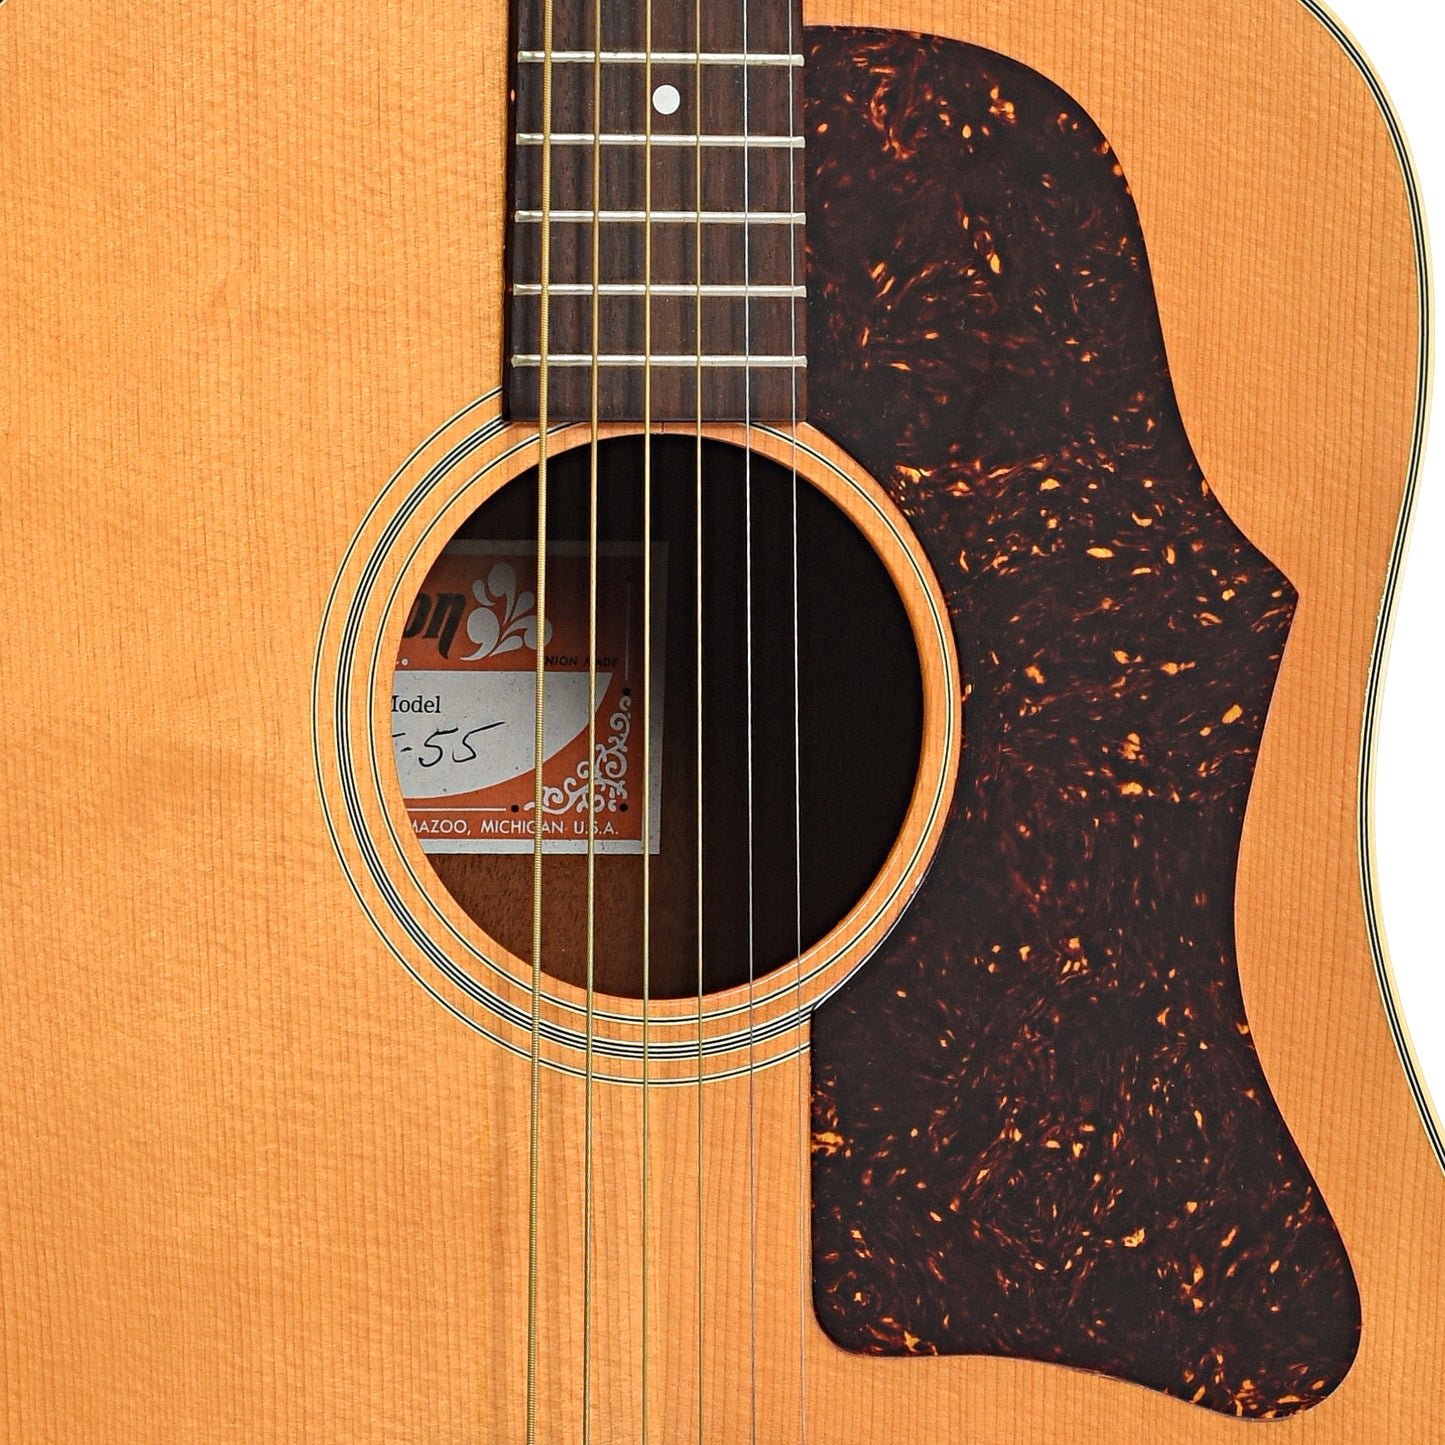 Sound hole and pickguard of Gibson J-55 Acoustic Guitar